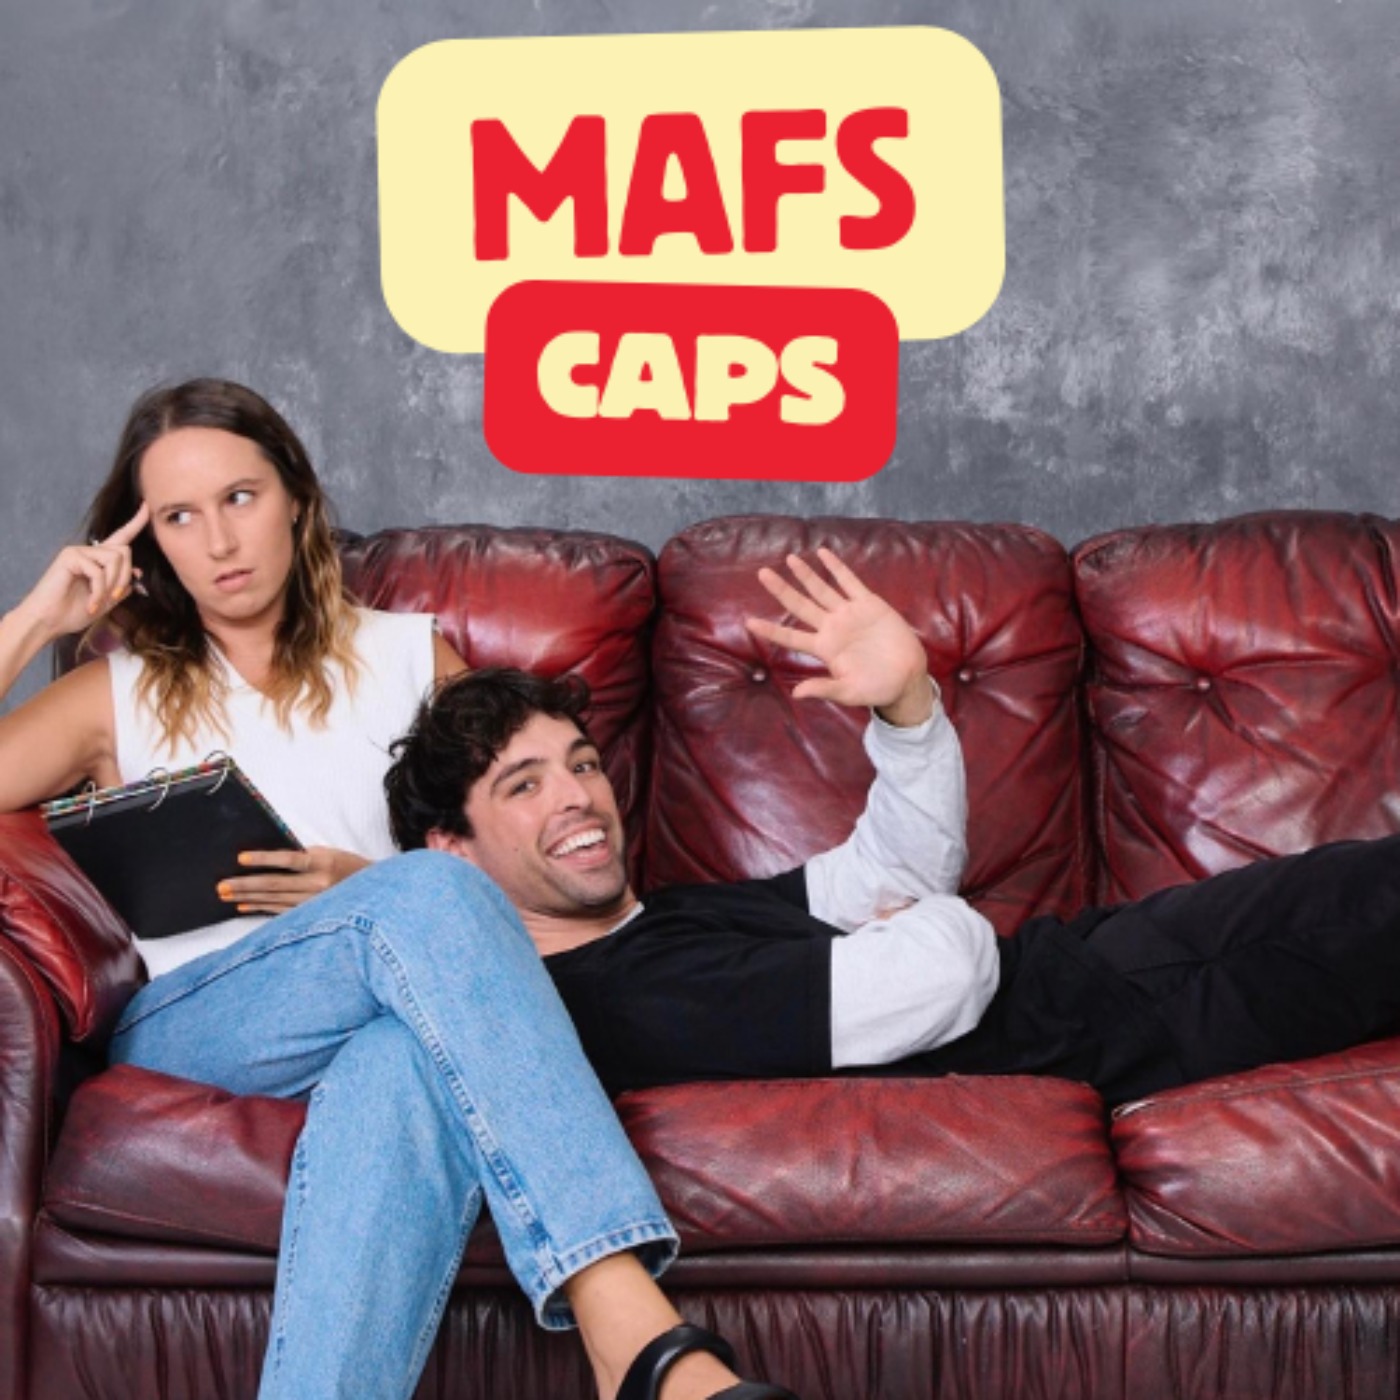 MAFSCAPS WEEK 7: Is A Relationship Ever Just Between 2 People?